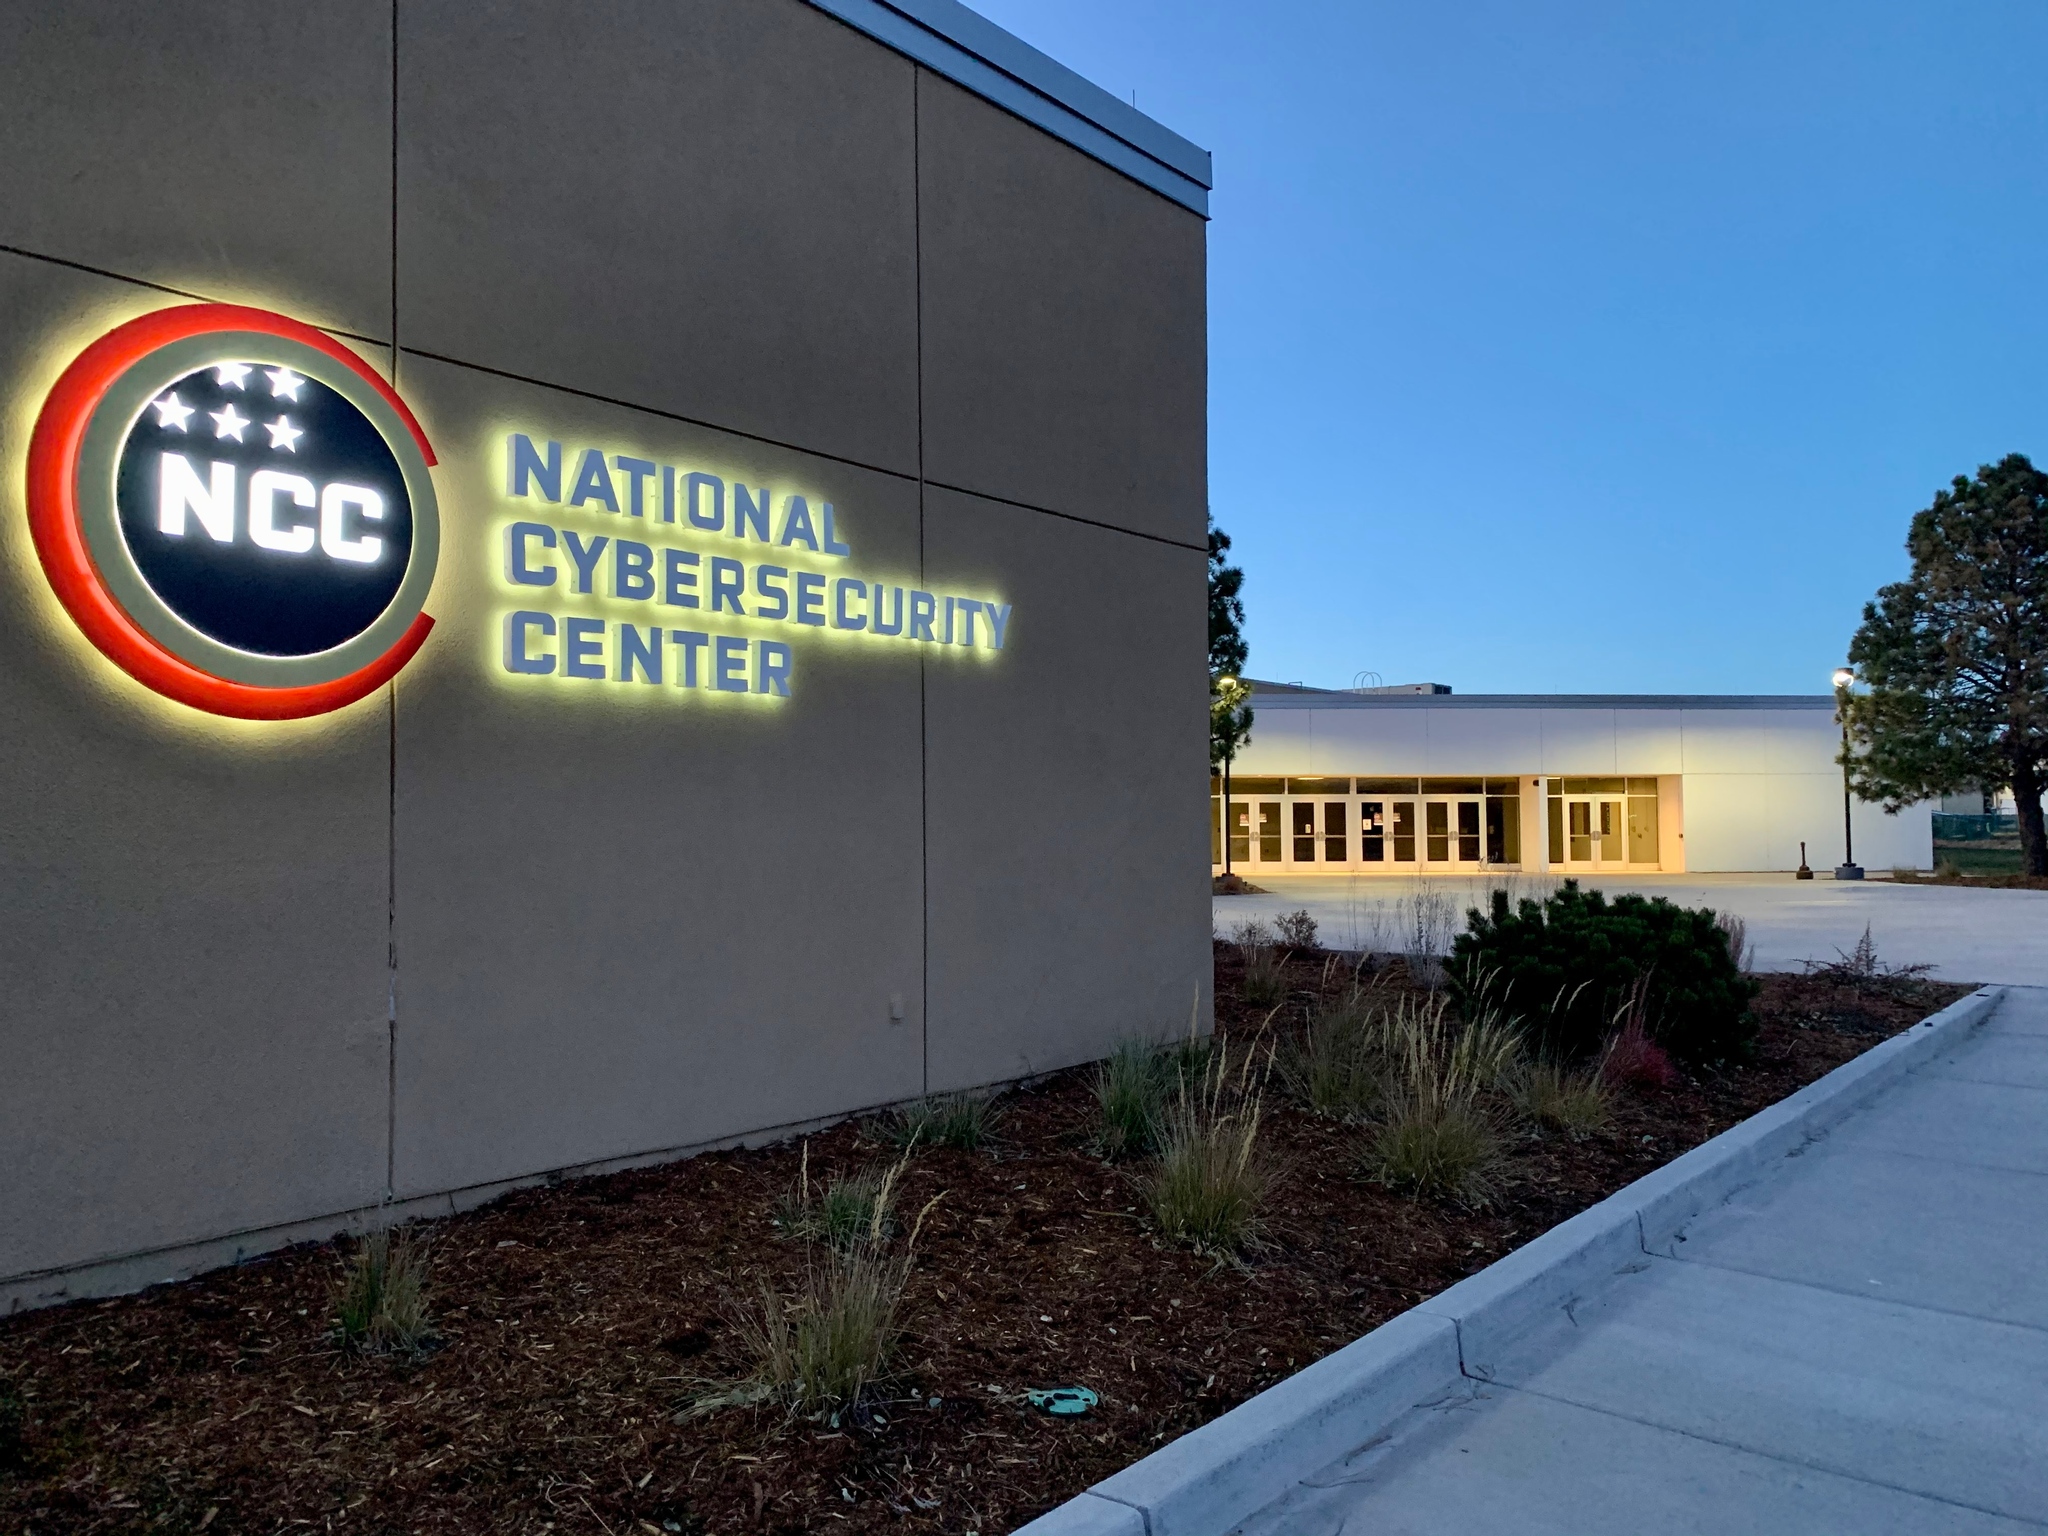 The National Cybersecurity Center is a cyber defense agency in Colorado Springs